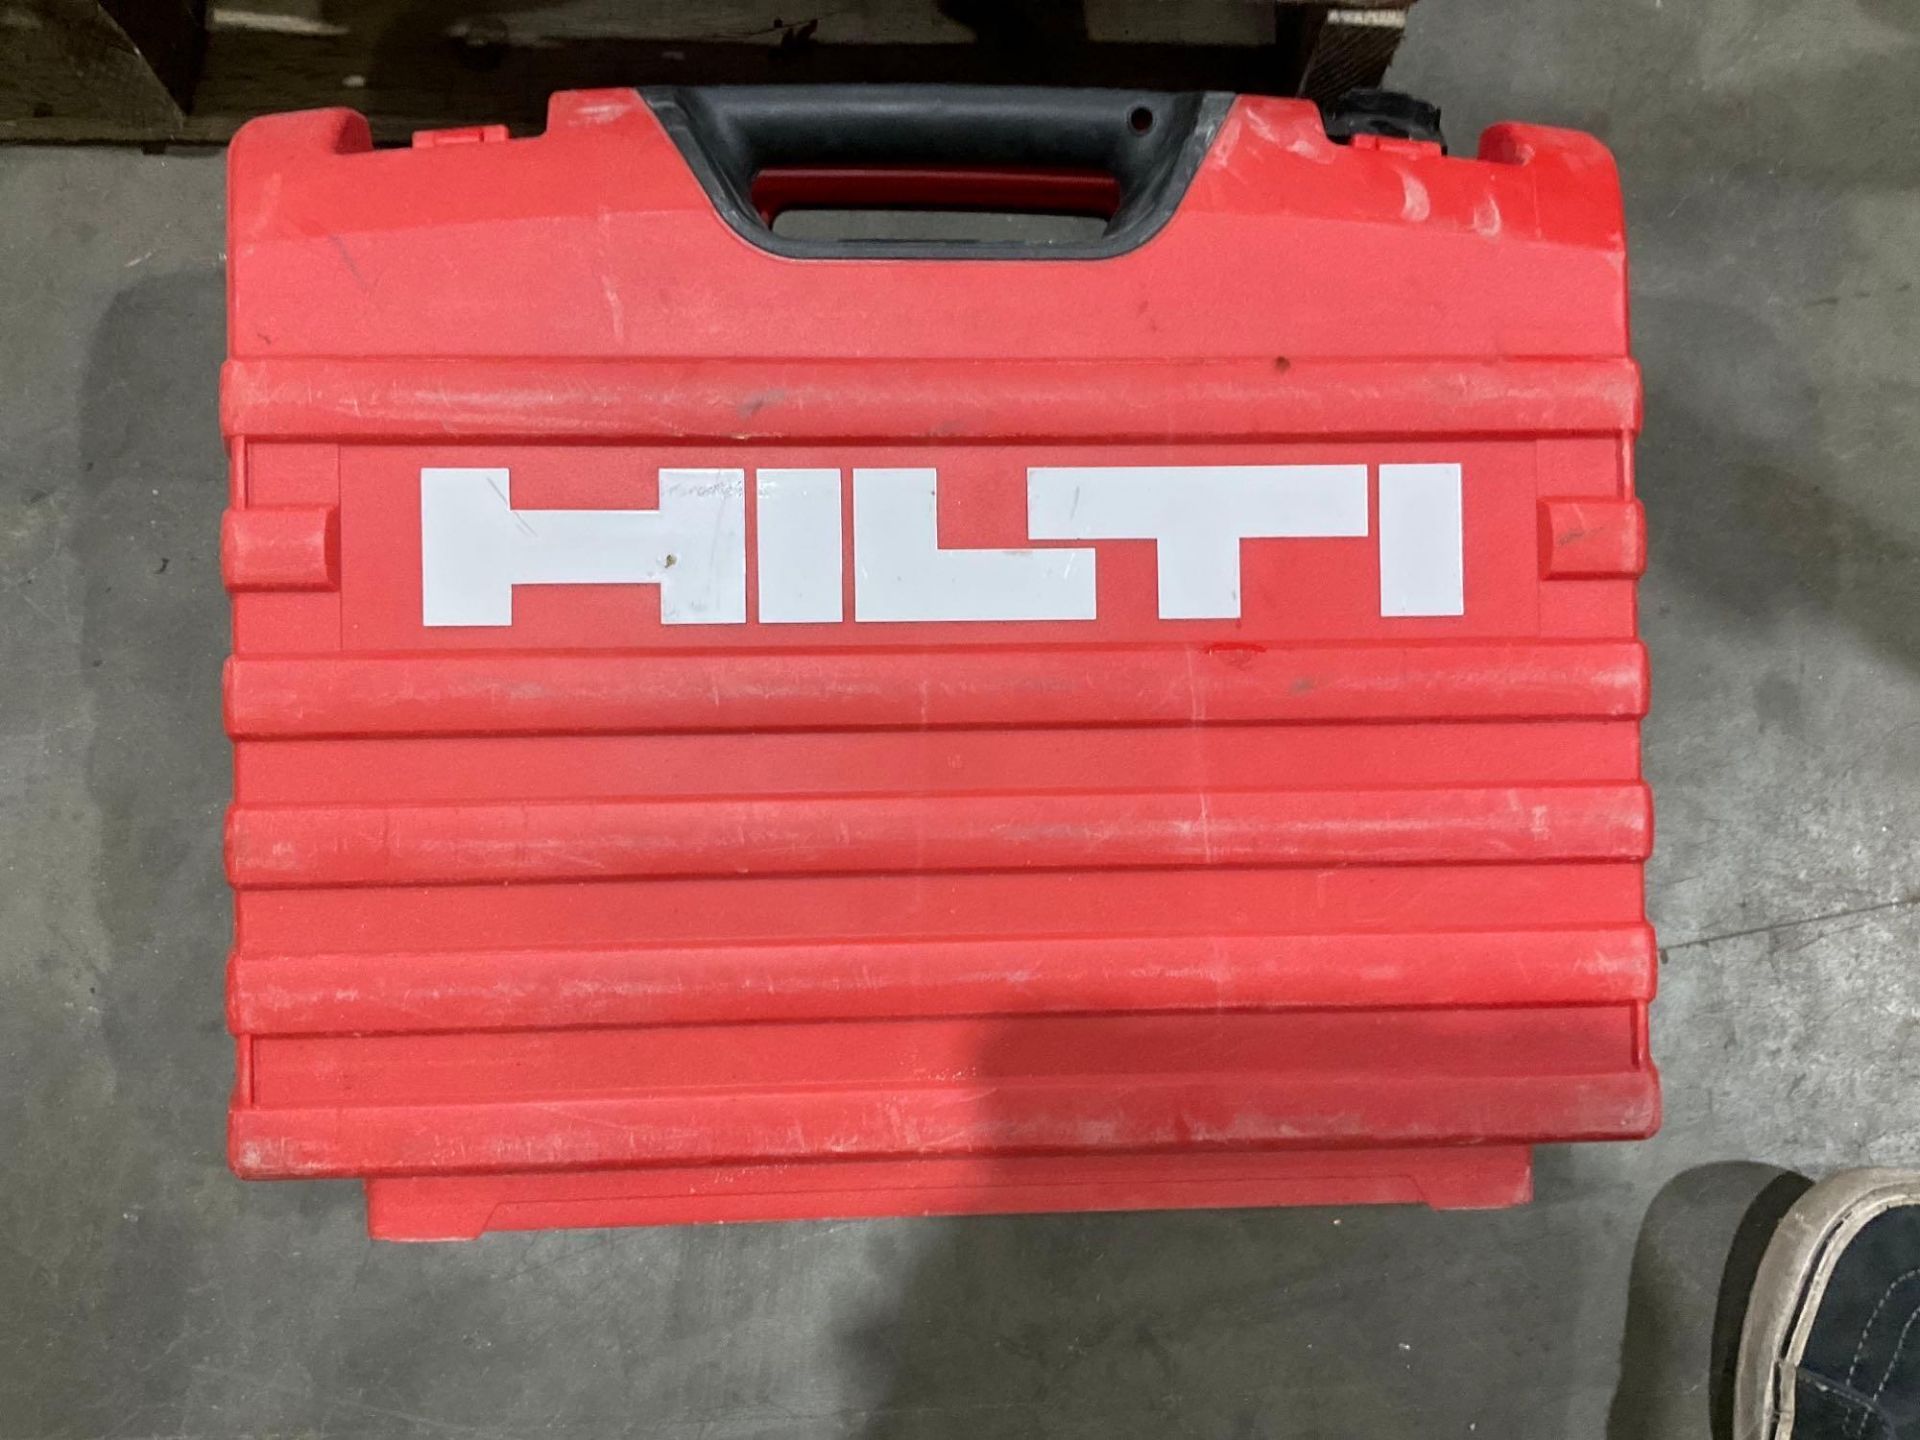 PALLET OF ( 5 ) HILTI HDM 500 MANUAL ADHESIVE DISPENSERS, ( 2 ) HILTI 500-A22 BATTERY POWERED - Image 2 of 7